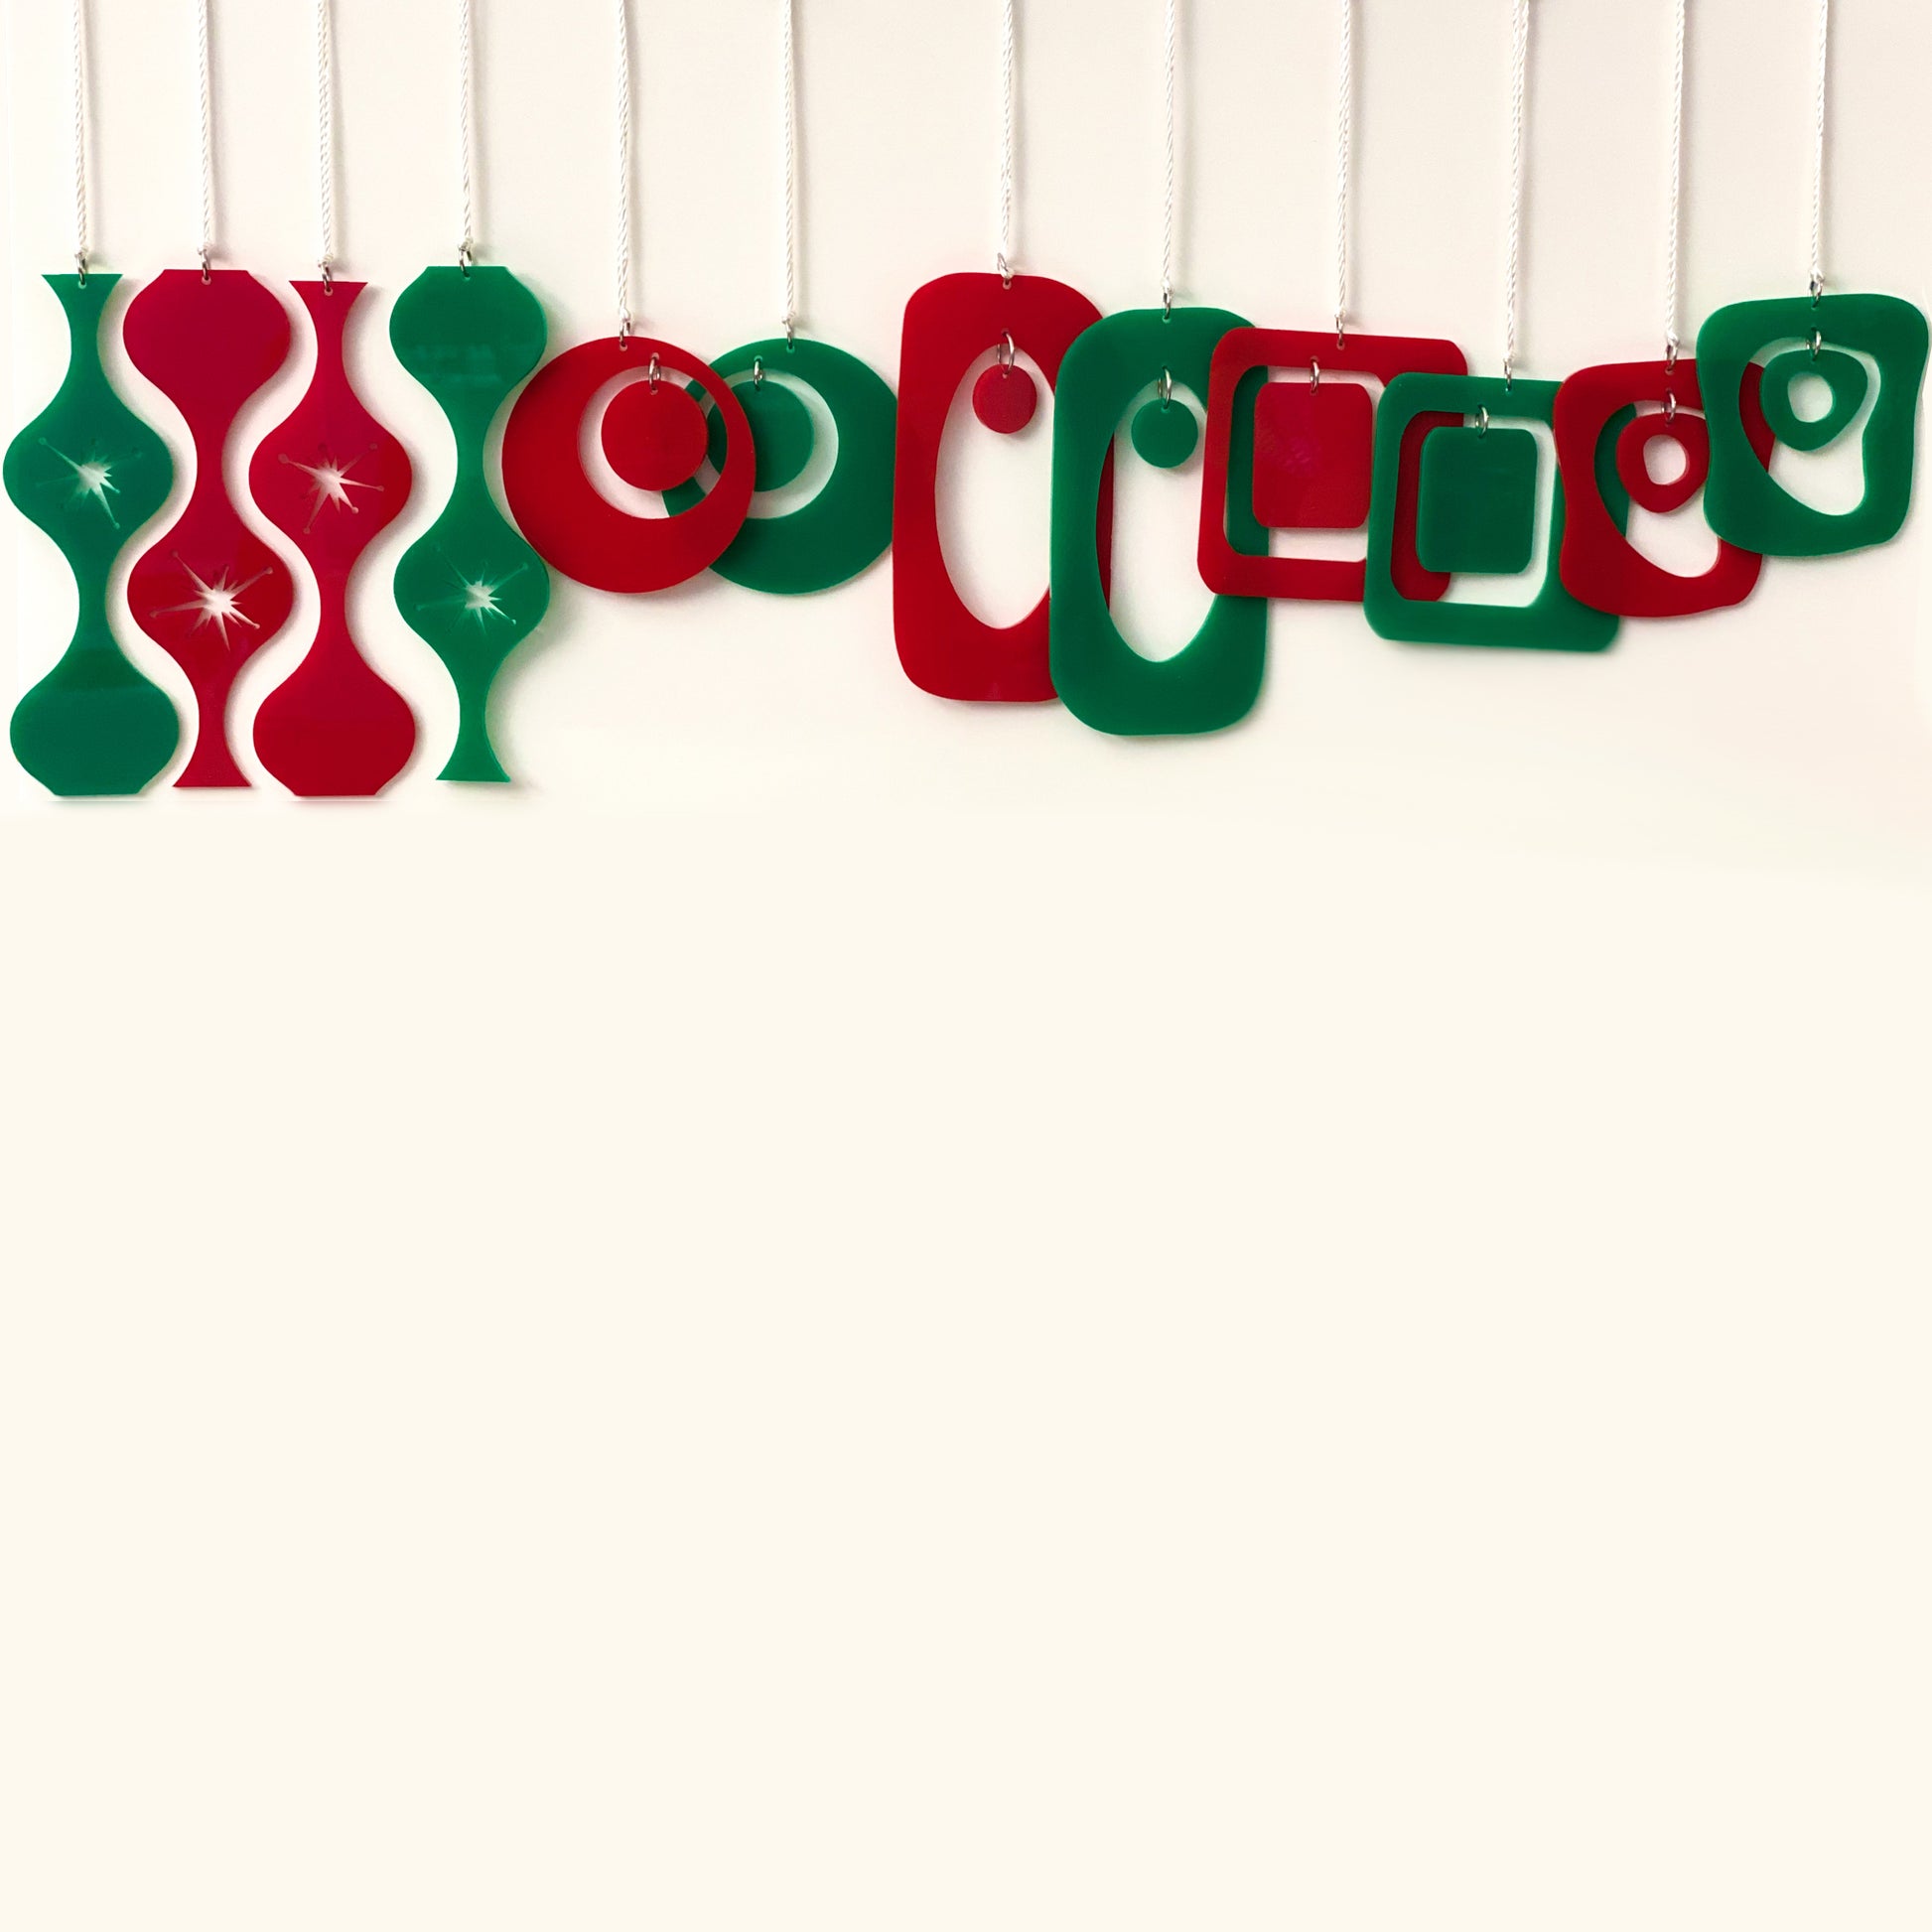 Festive set of 12 mid century modern style Christmas Ornaments in red and green by AtomicMobiles.com